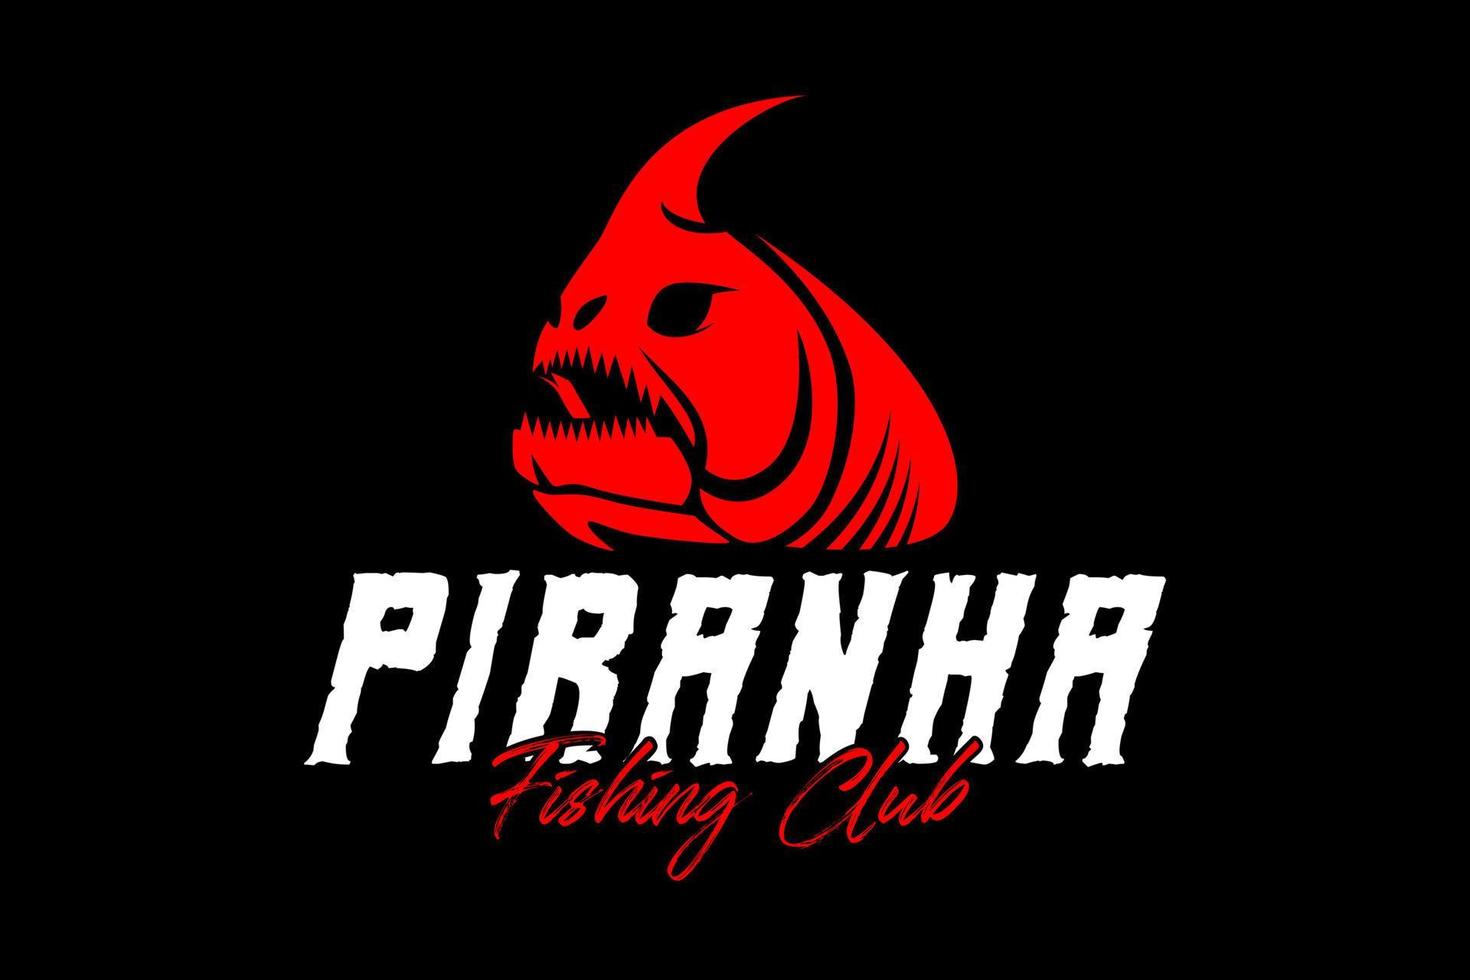 Piranha skeleton fish fishing logo on black dark background. modern vintage rustic logo design. great to use as your any fishing company logo and brand vector